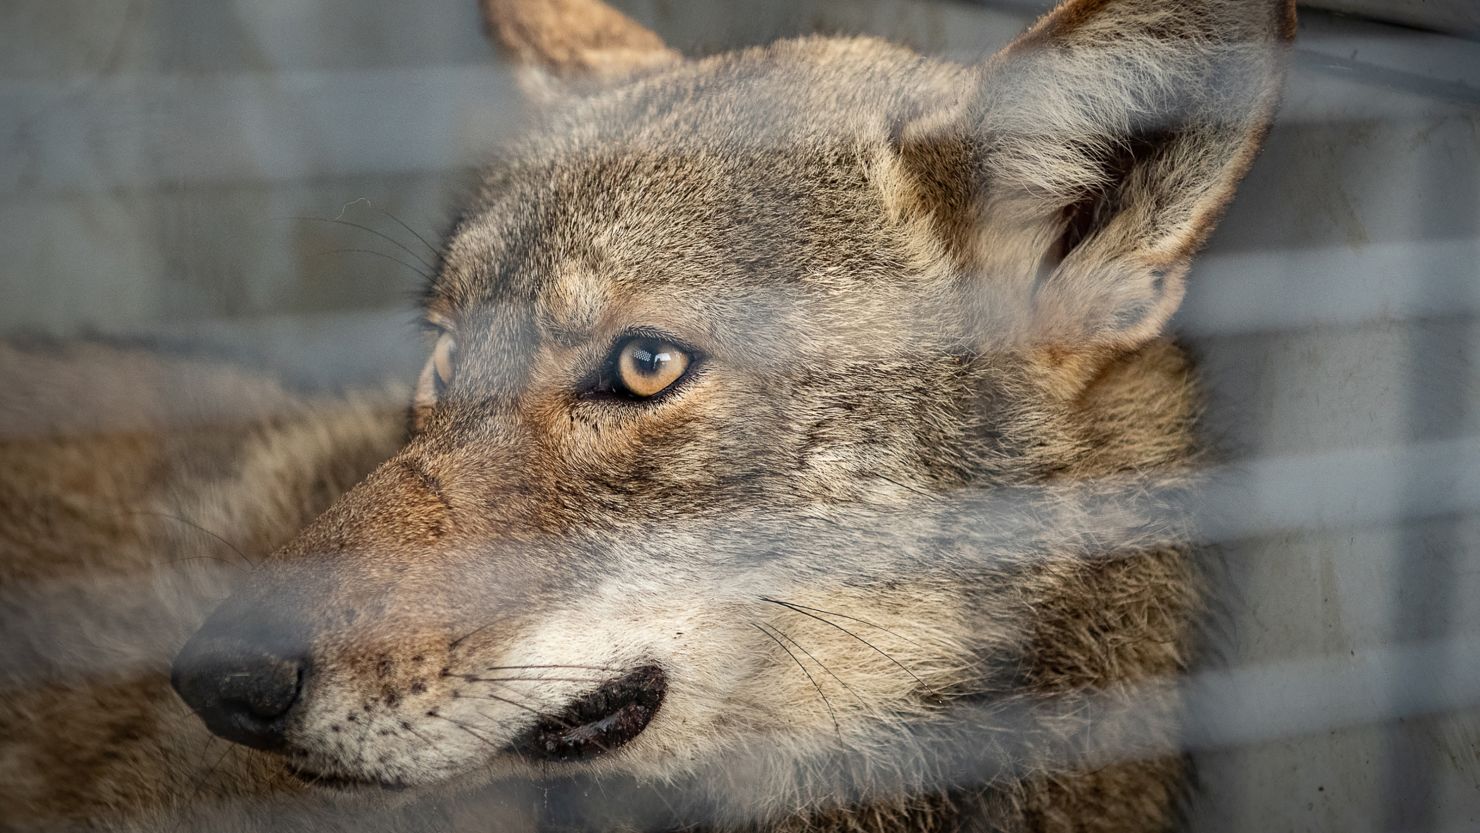 A recently captured marsh coyote waits to be processed and collared for a study exploring red wolf ancestry in the southwestern coastal Louisiana coyote population.